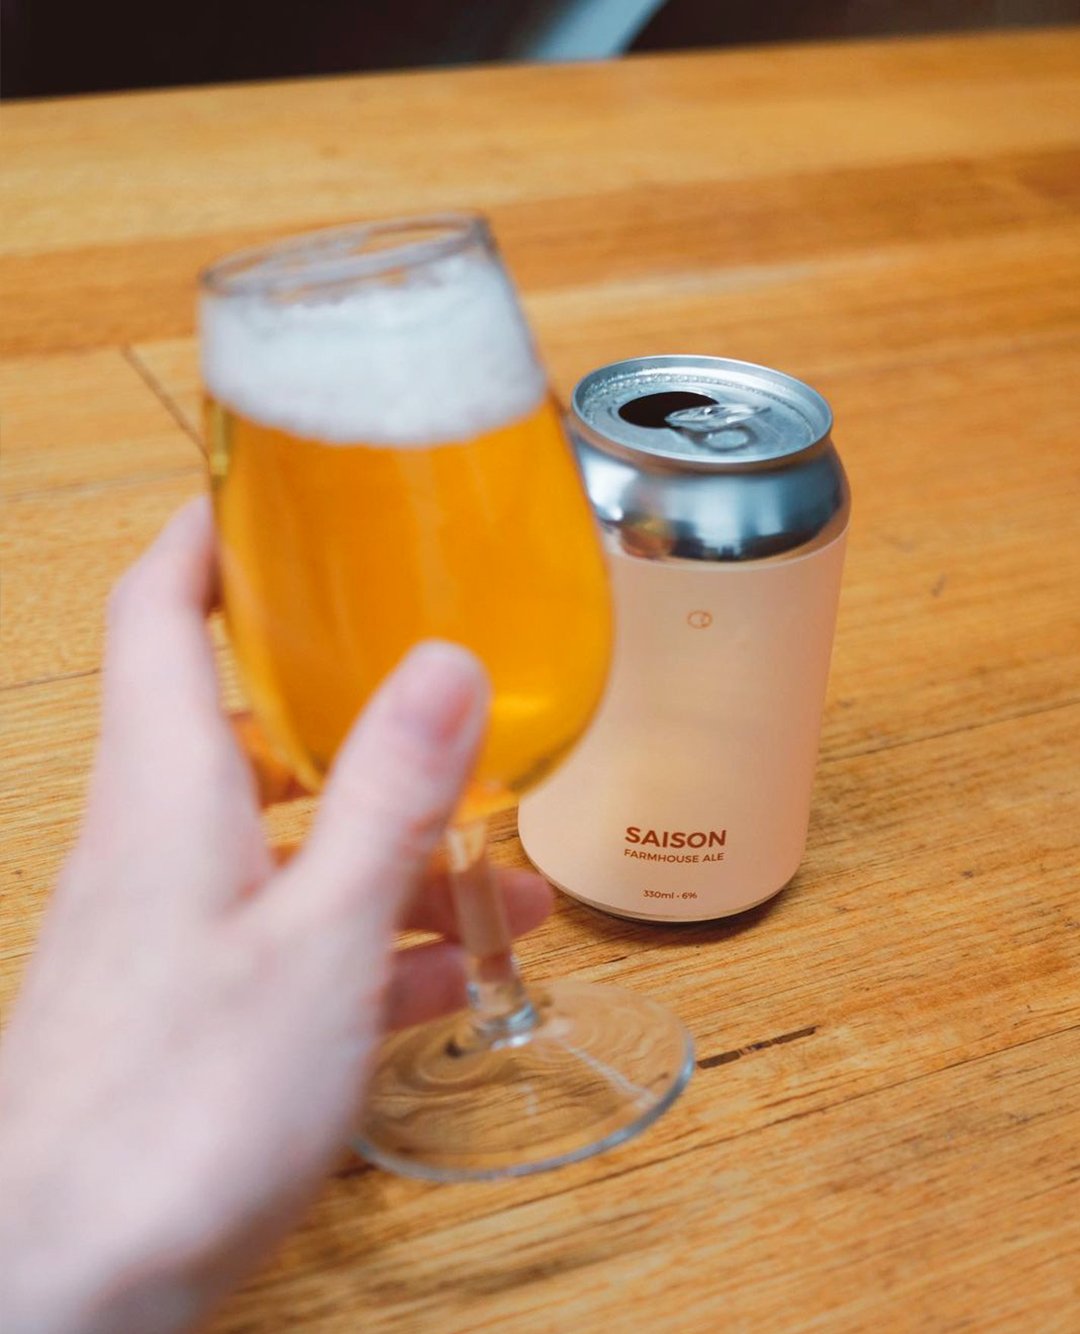 person holding a glass of saison farmhouse ale from a can